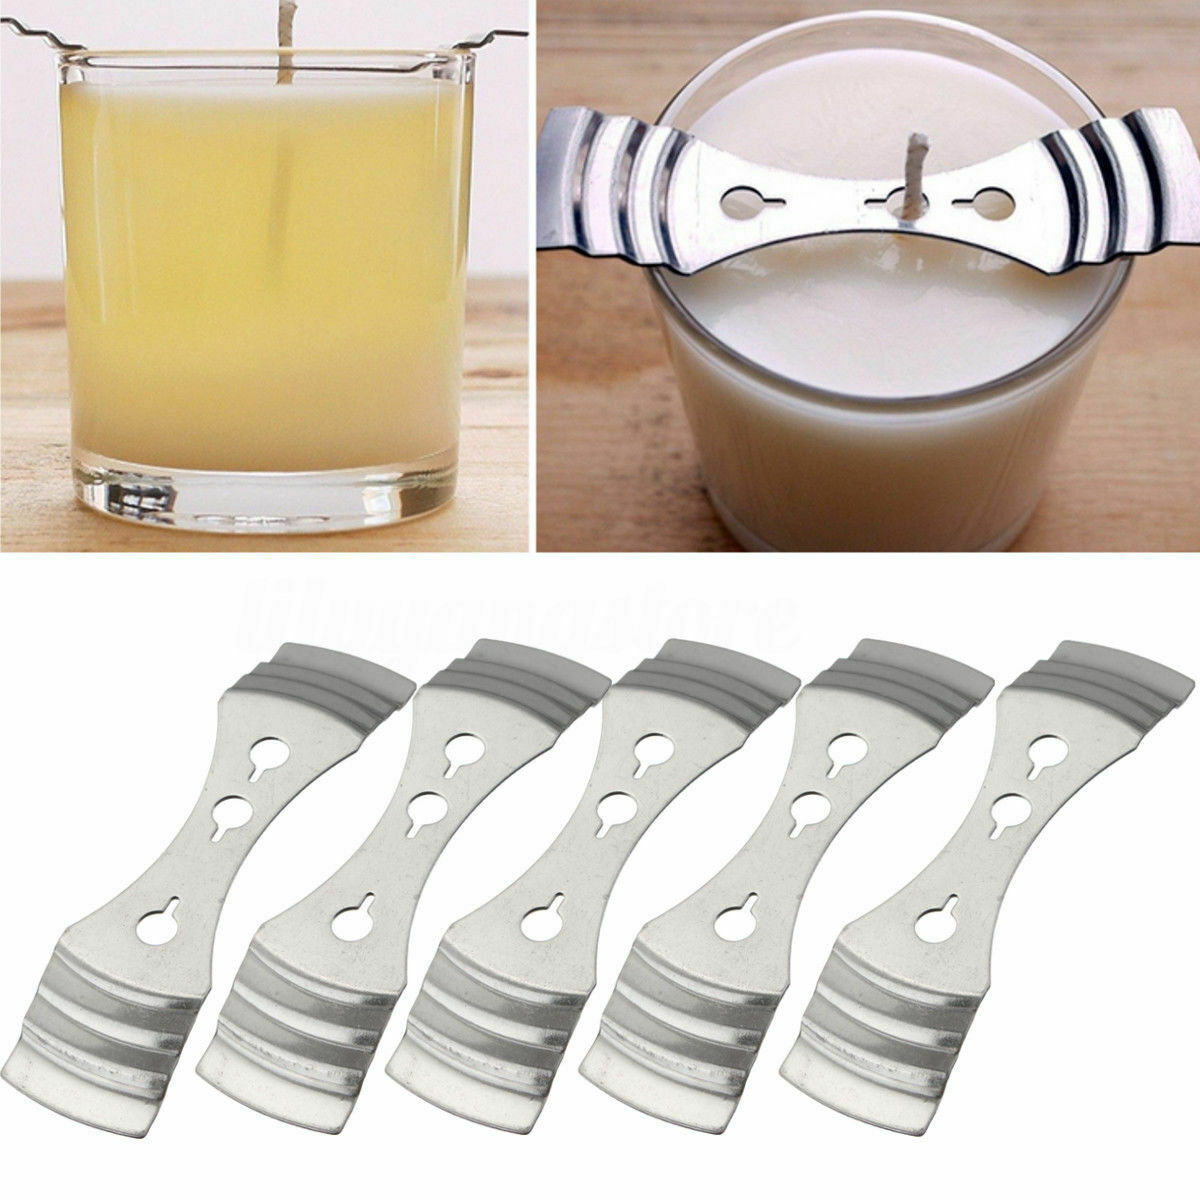 5pcs Metal Candle Wicks Centering Device Holder Candle Making Supplies 10*2.5cm